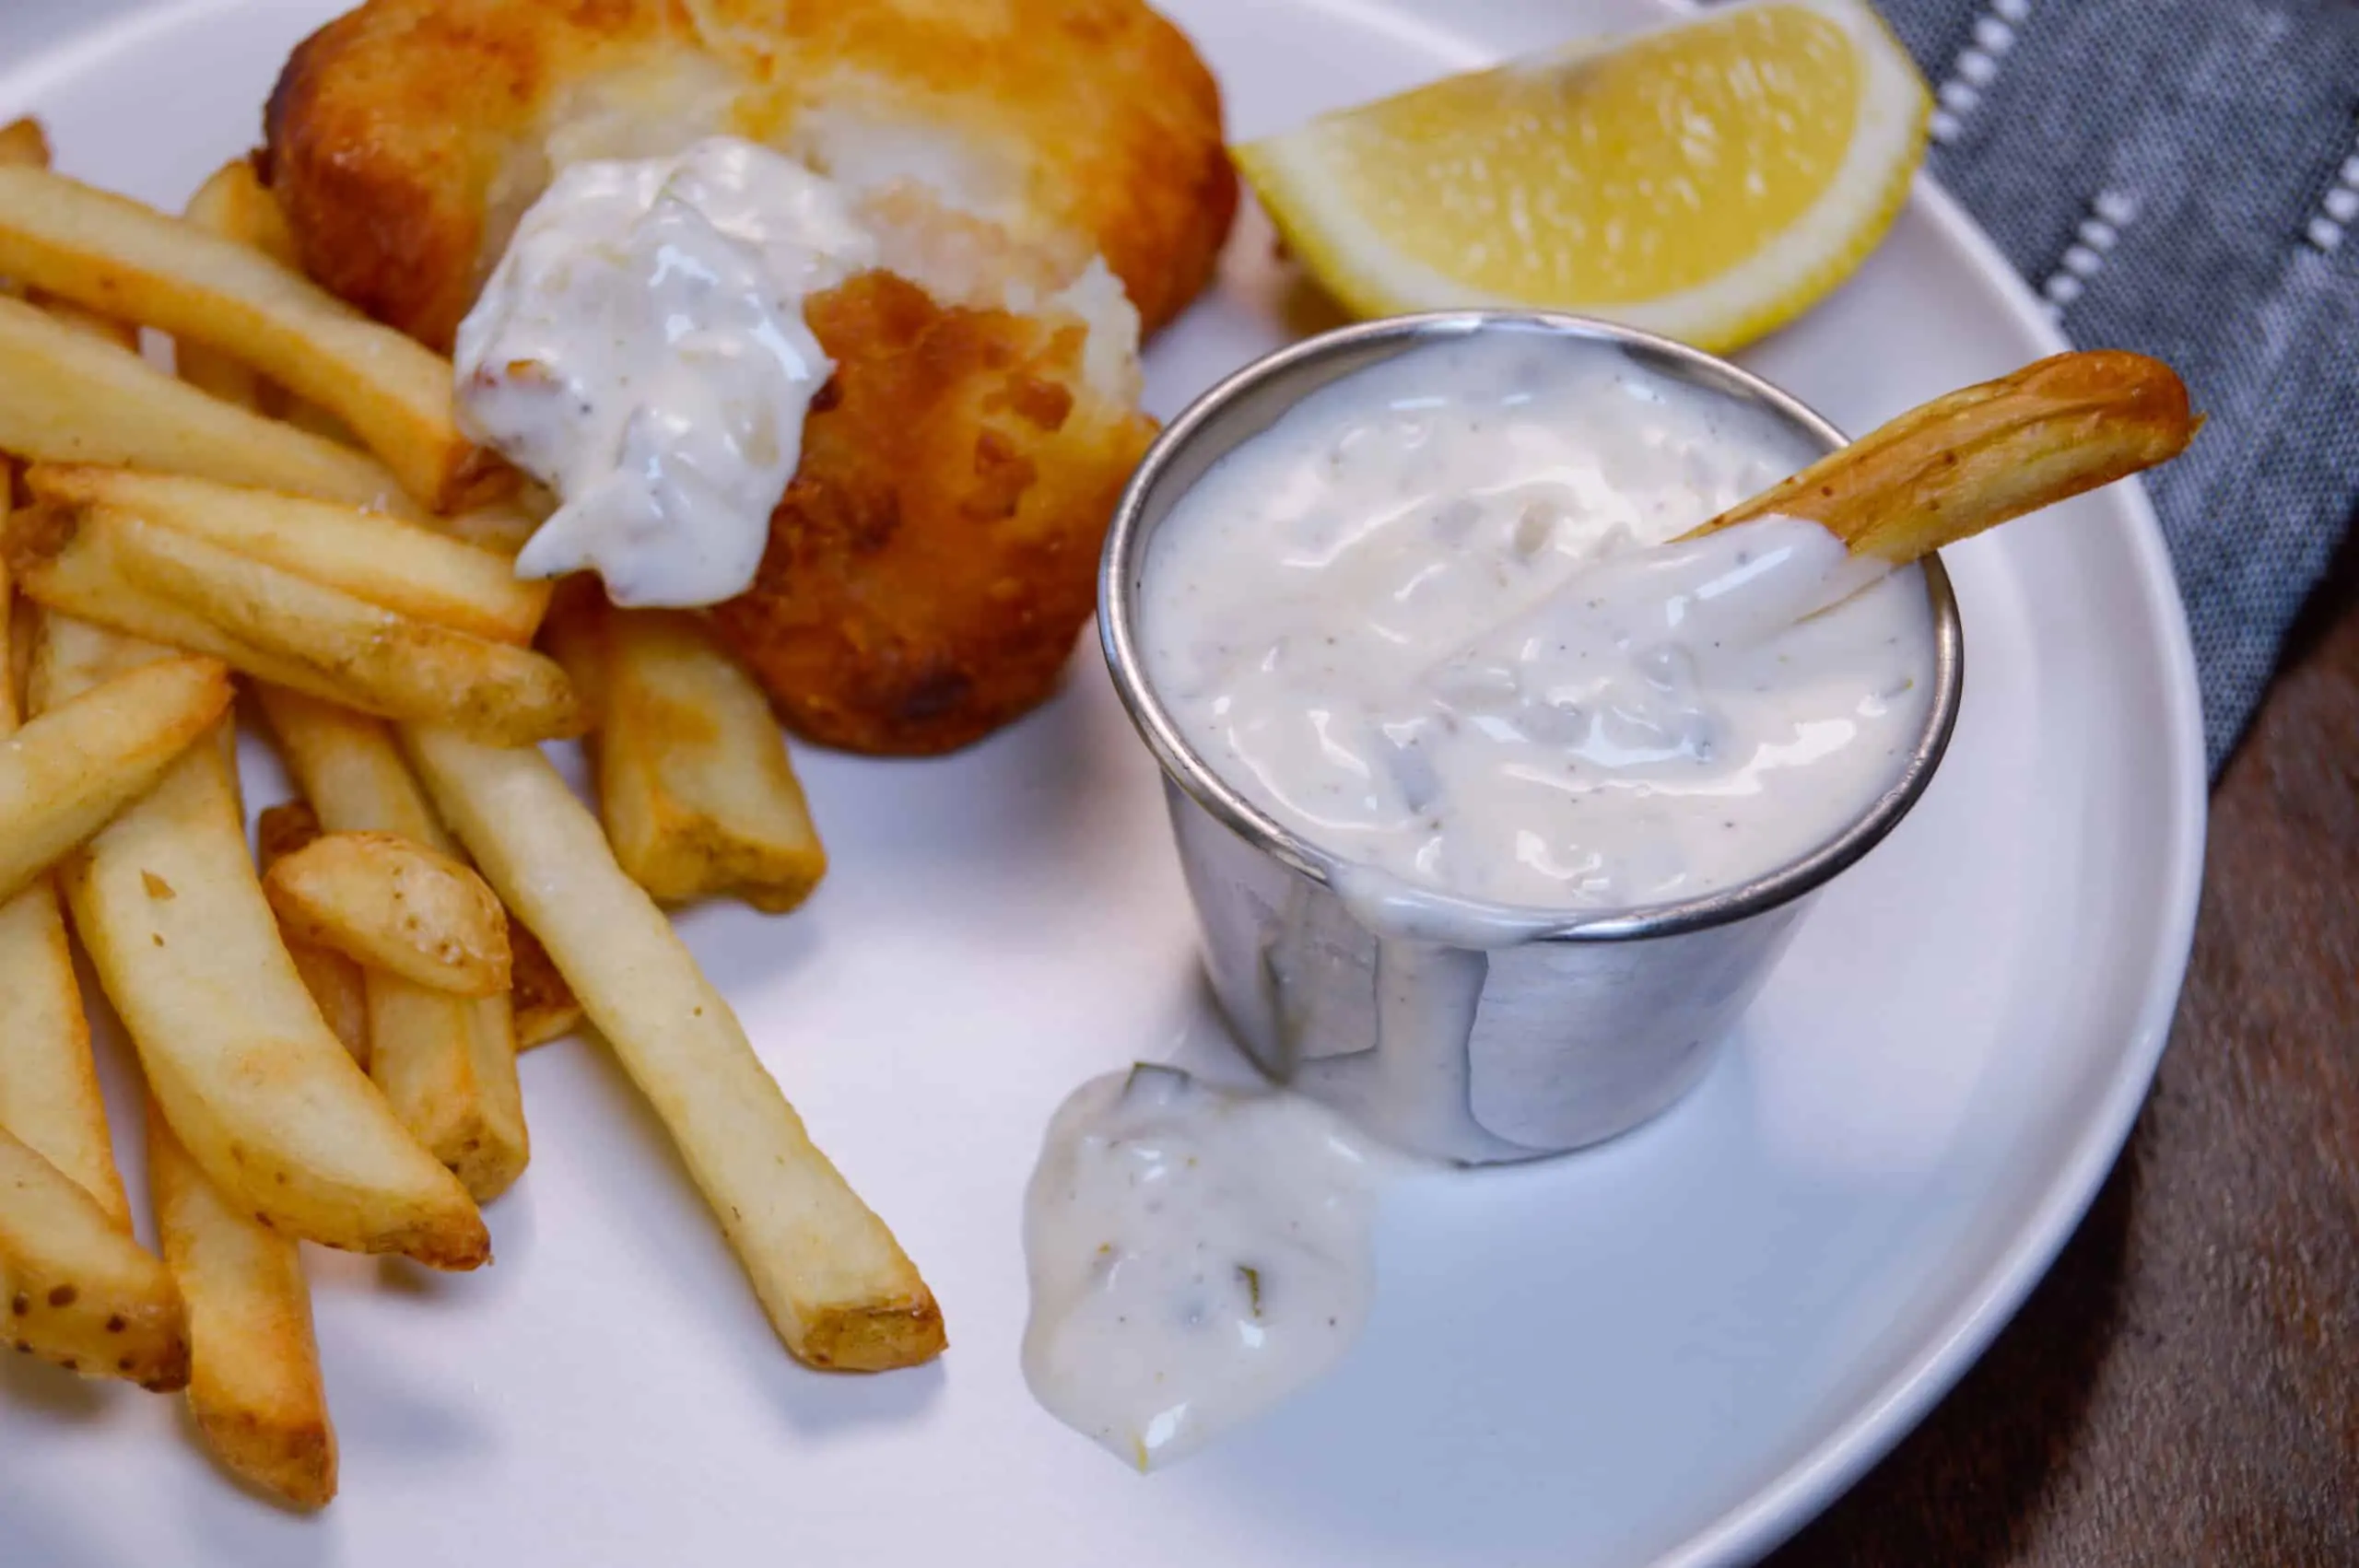 Easy Tartar Sauce with Fry dipped in ramekin, fries on side with dipped fish and a lemon wedge